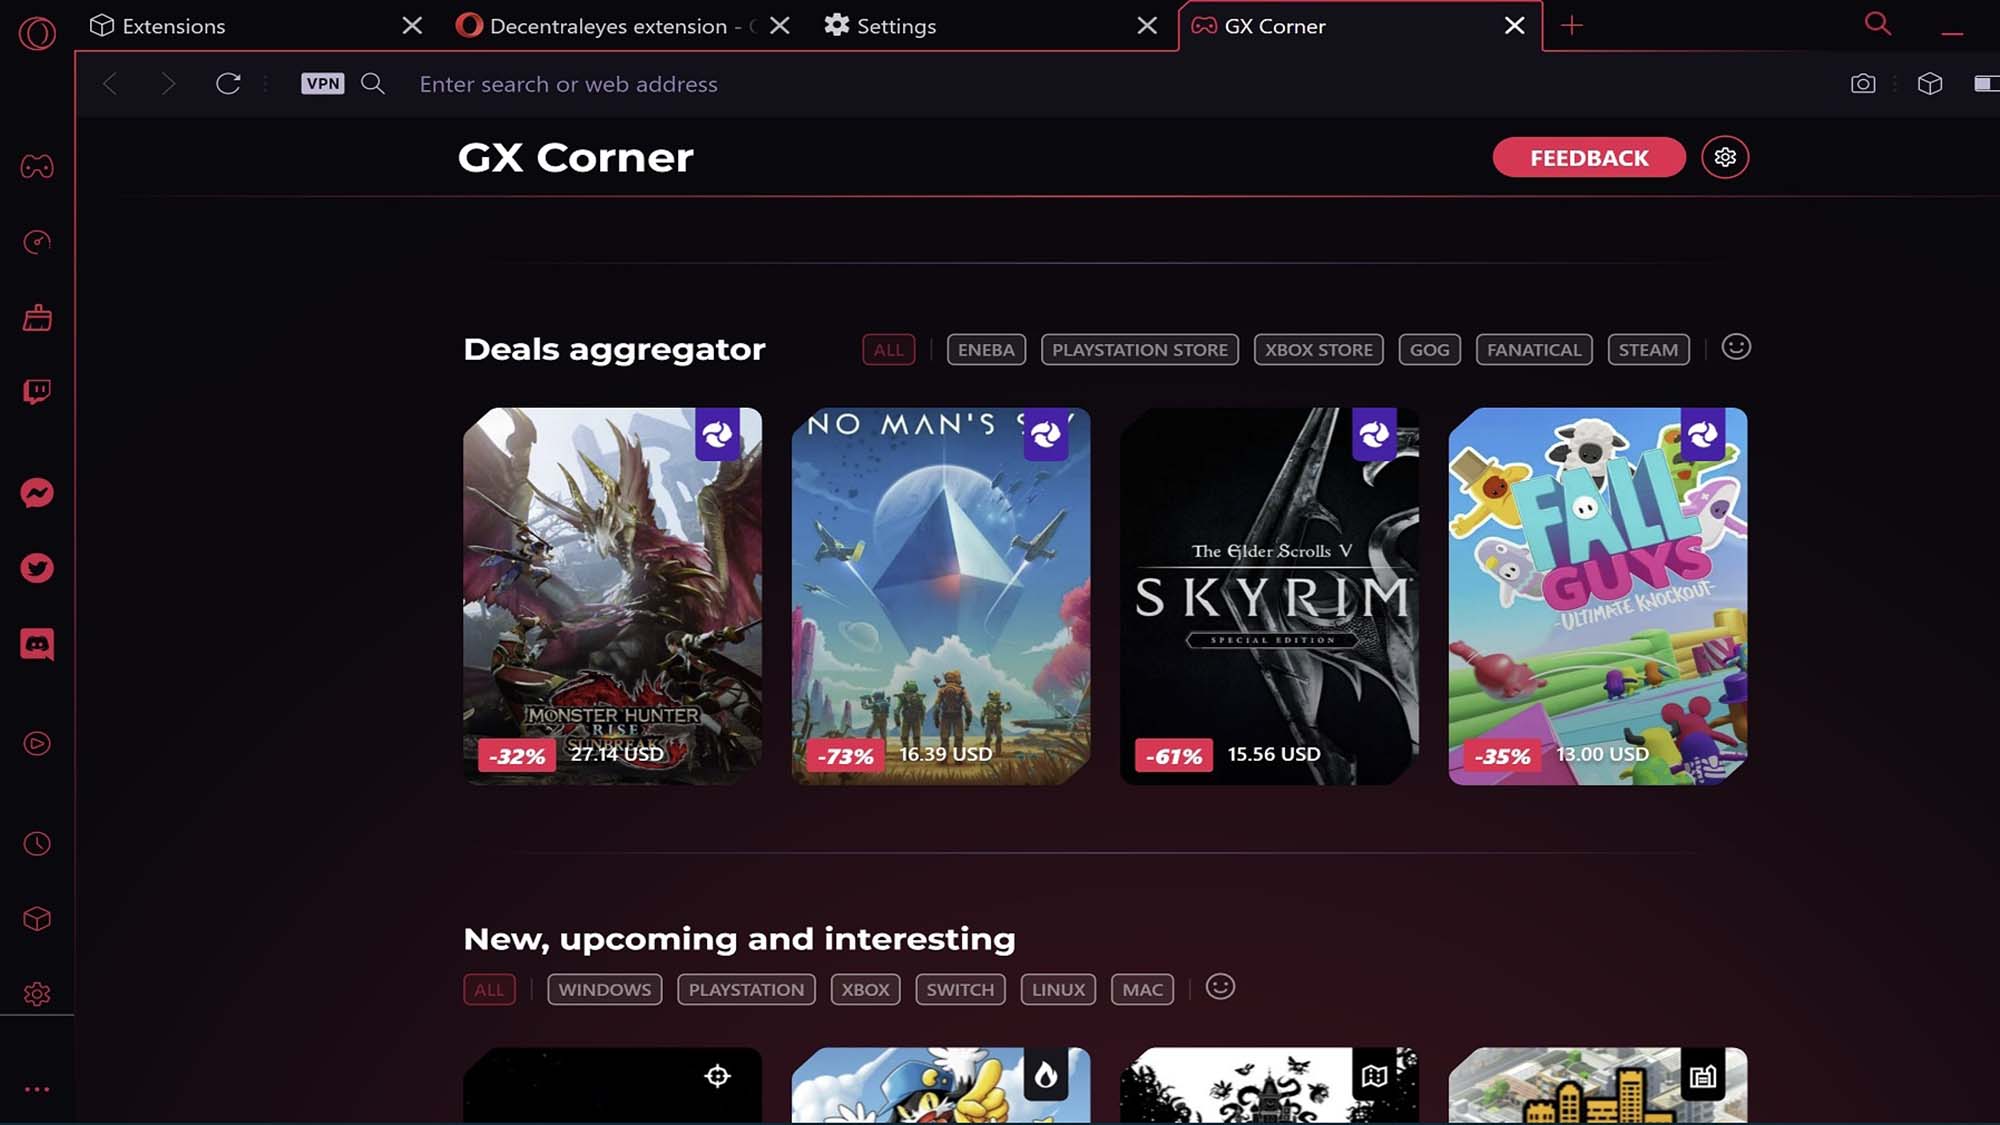 The Opera GX browser on a gaming PC